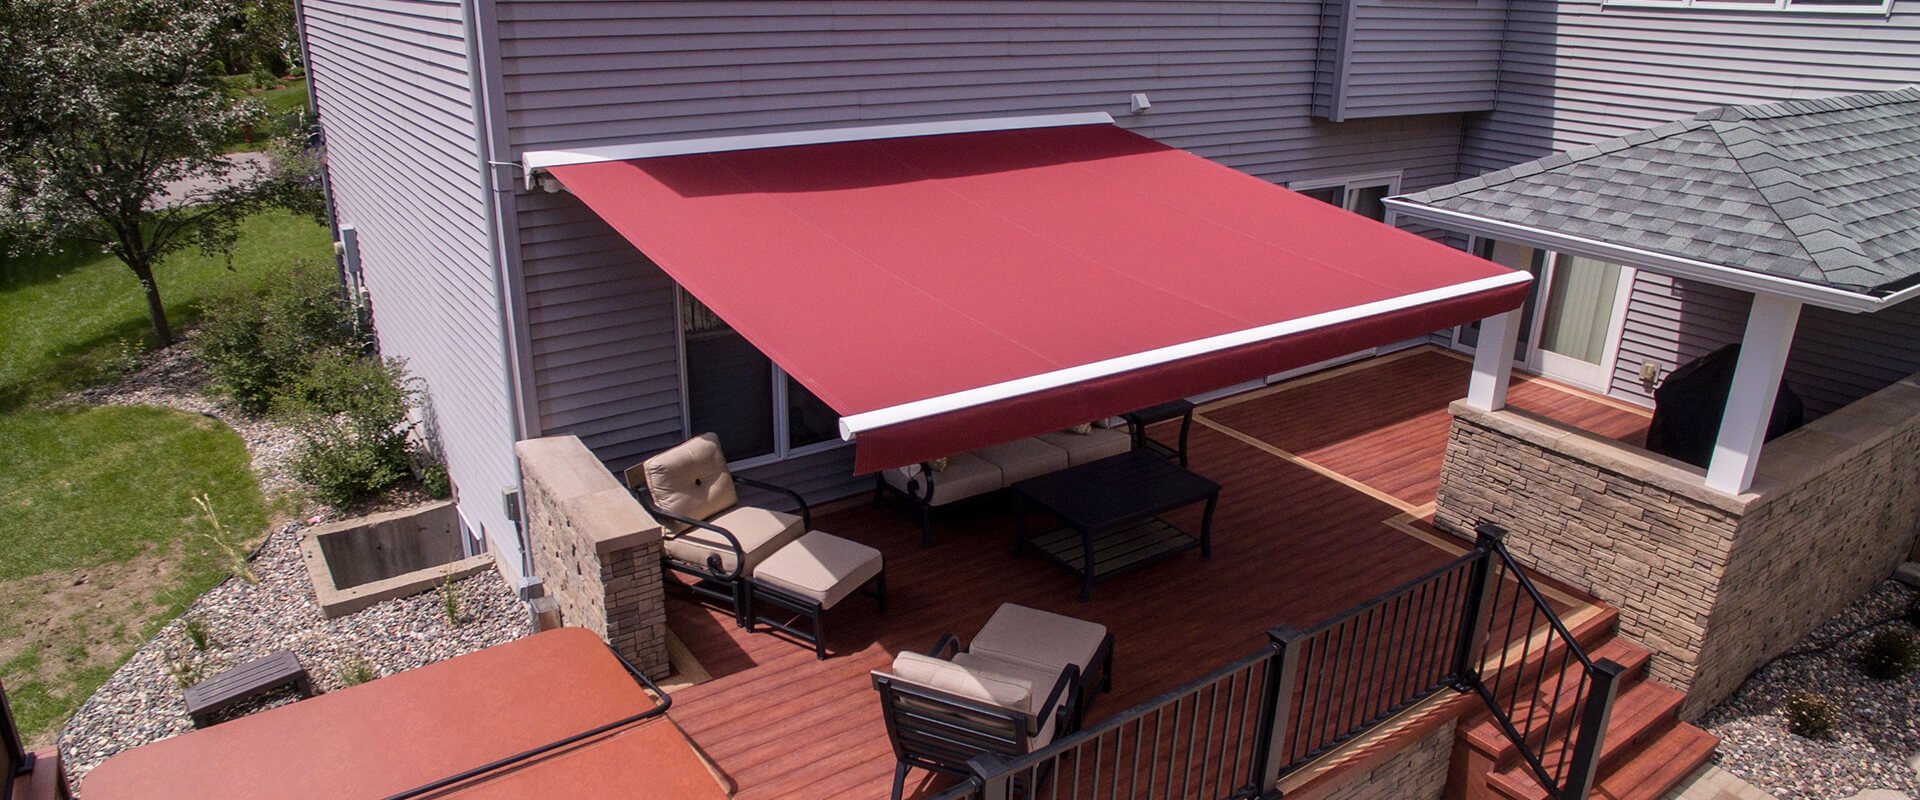 The Role of Retractable Awnings in Energy Efficiency